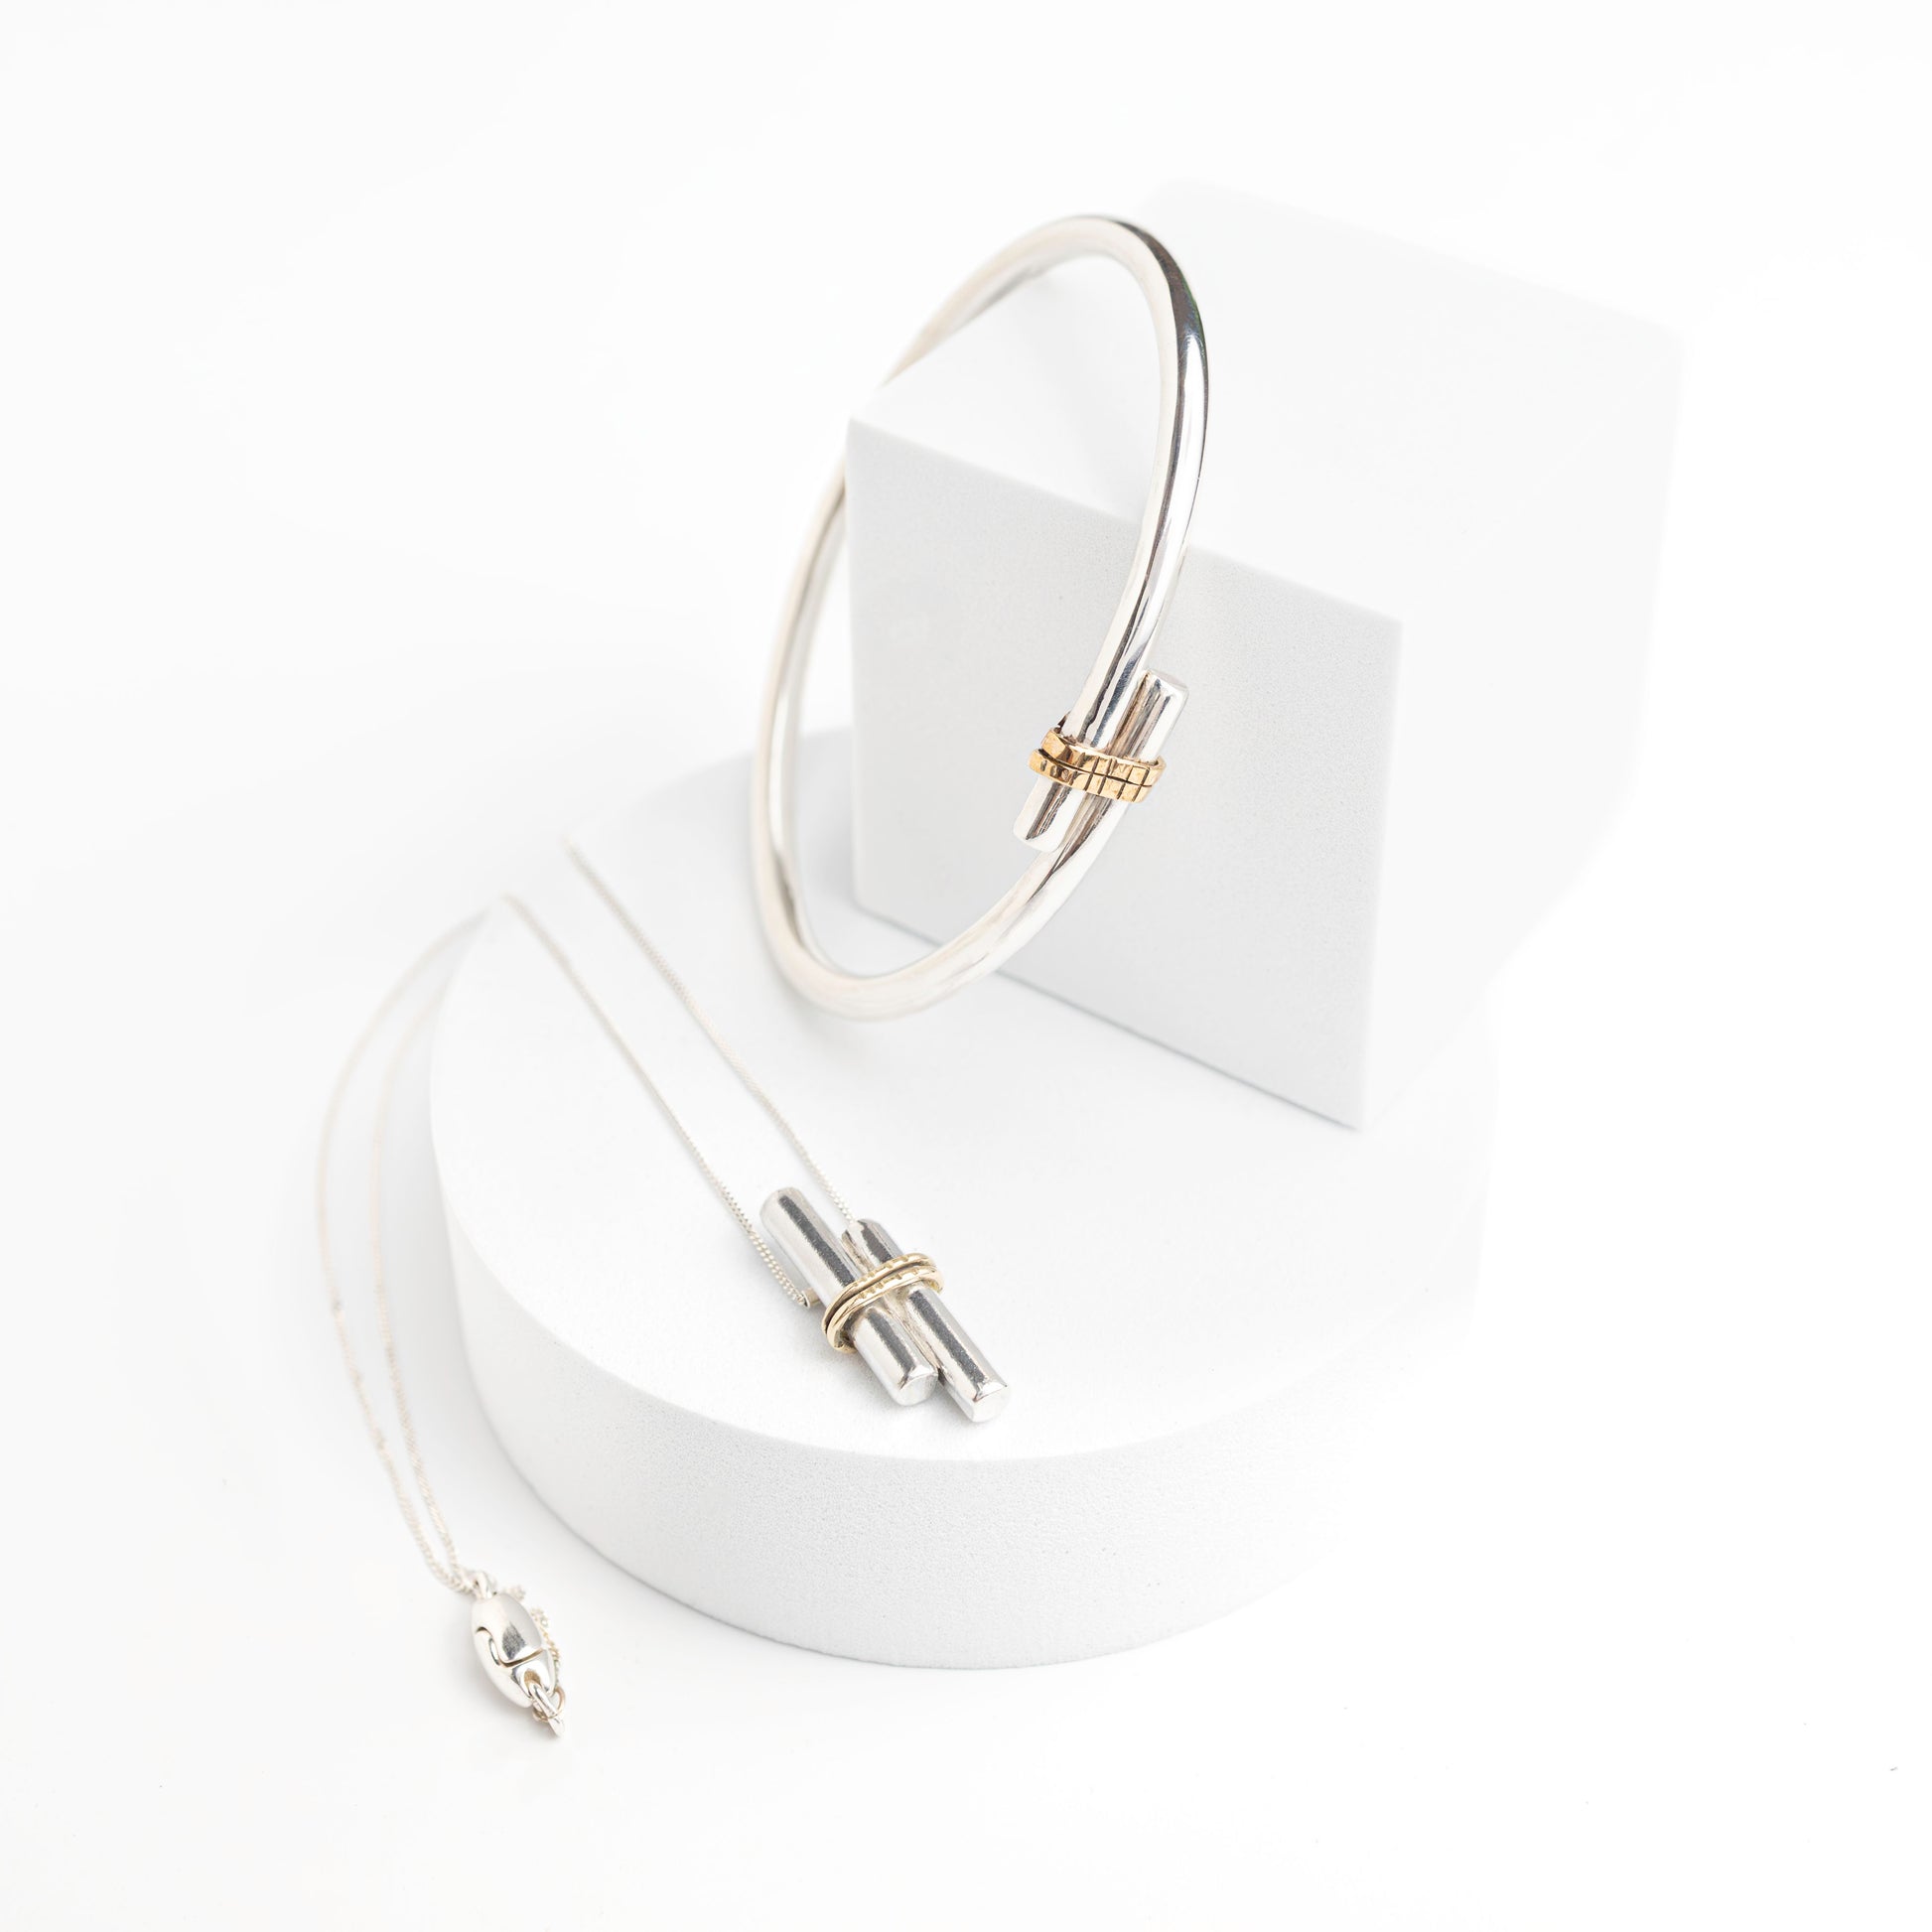 sterling silver bangle with gold trim with matching pendant on a white background - showing magnetic clasp